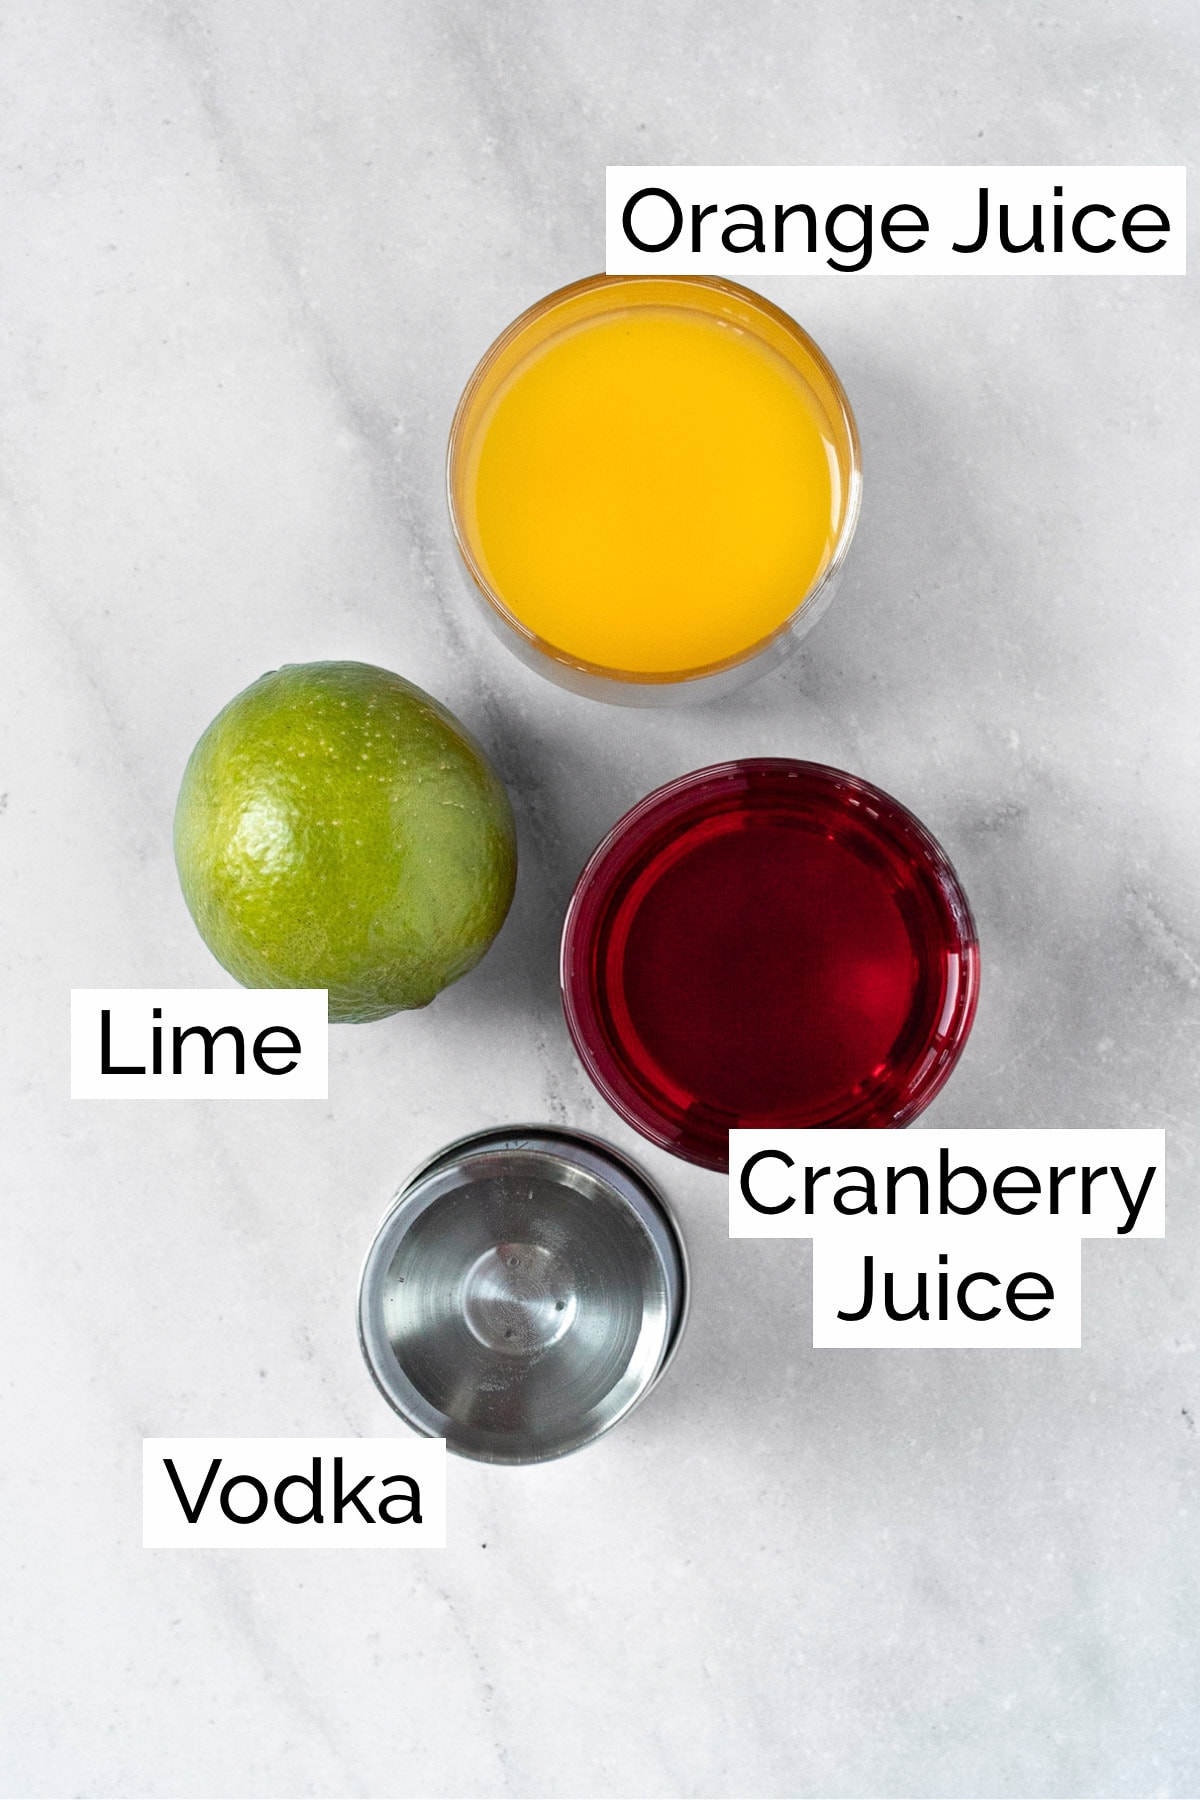 Overhead view of the ingredients needed to make this madras drink.